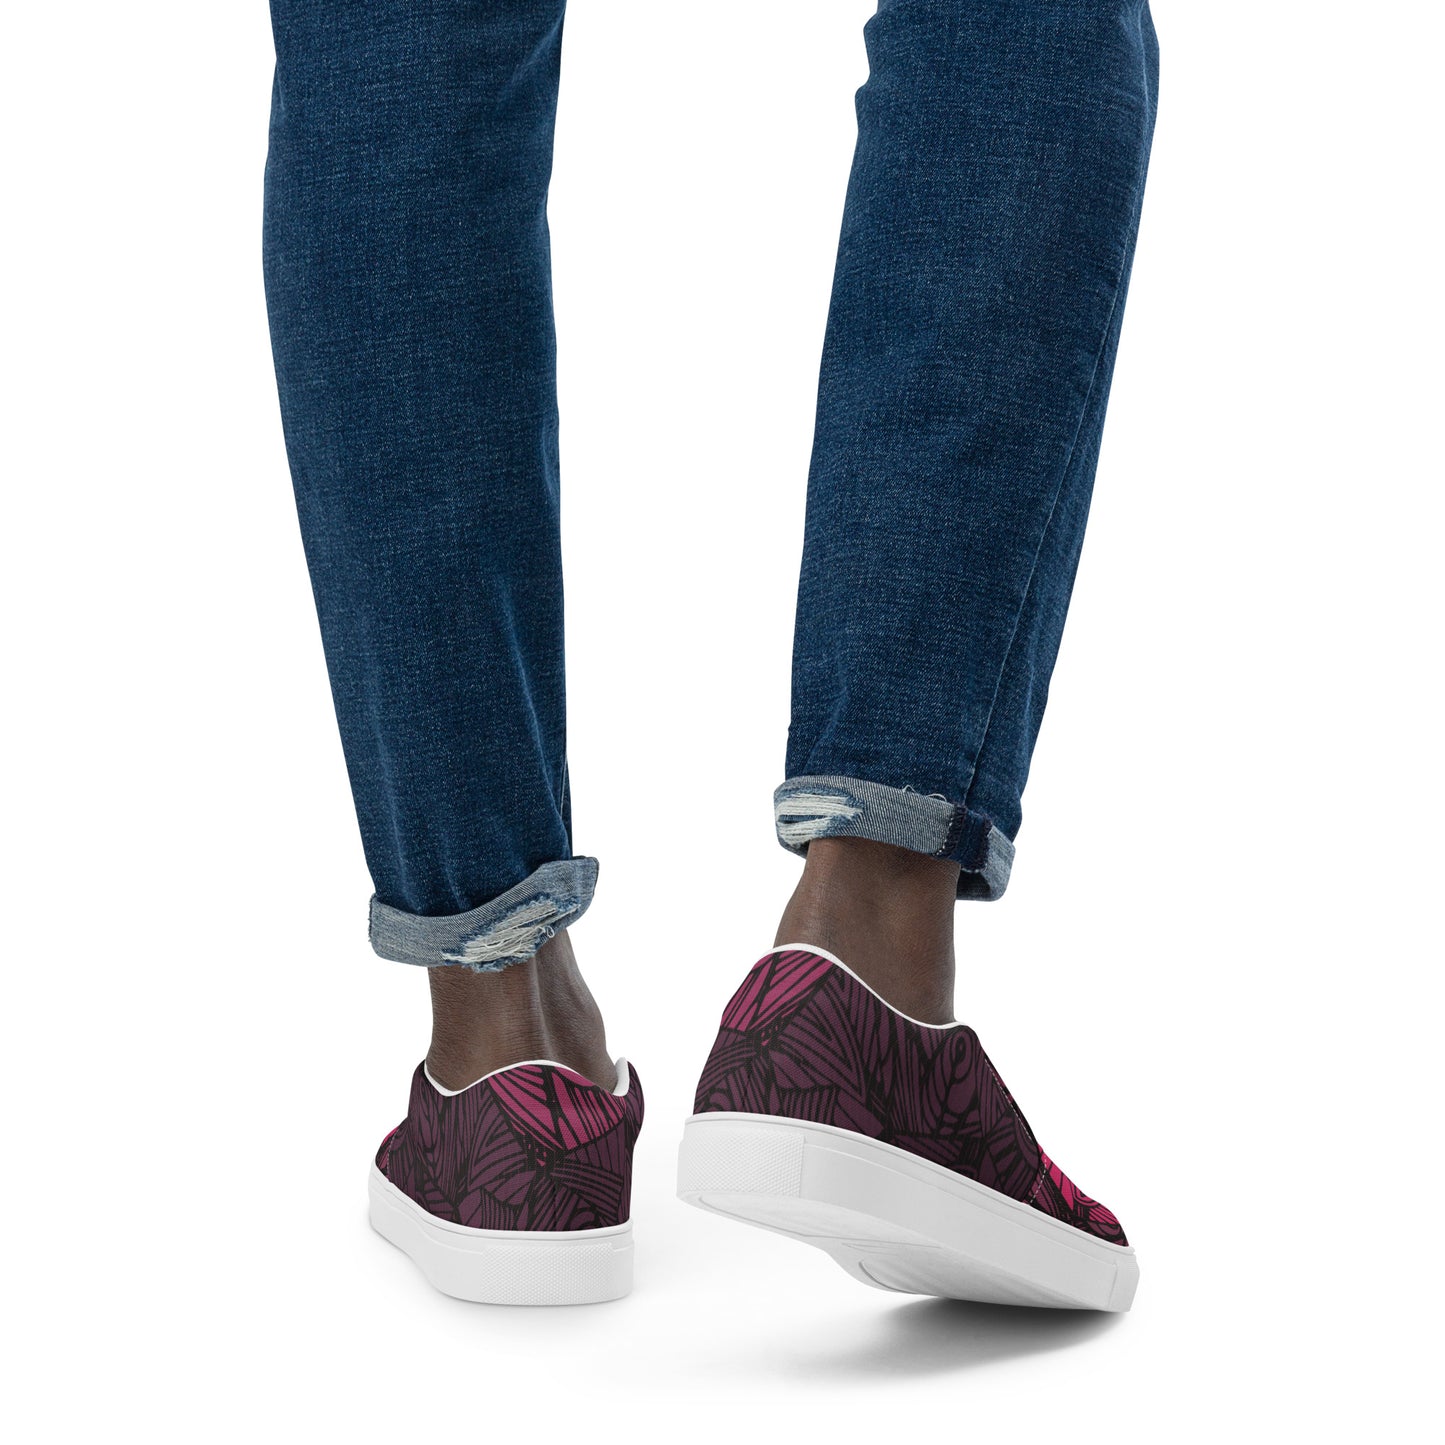 Worldtown Guaranteed To Dream Men’s slip-on canvas shoes